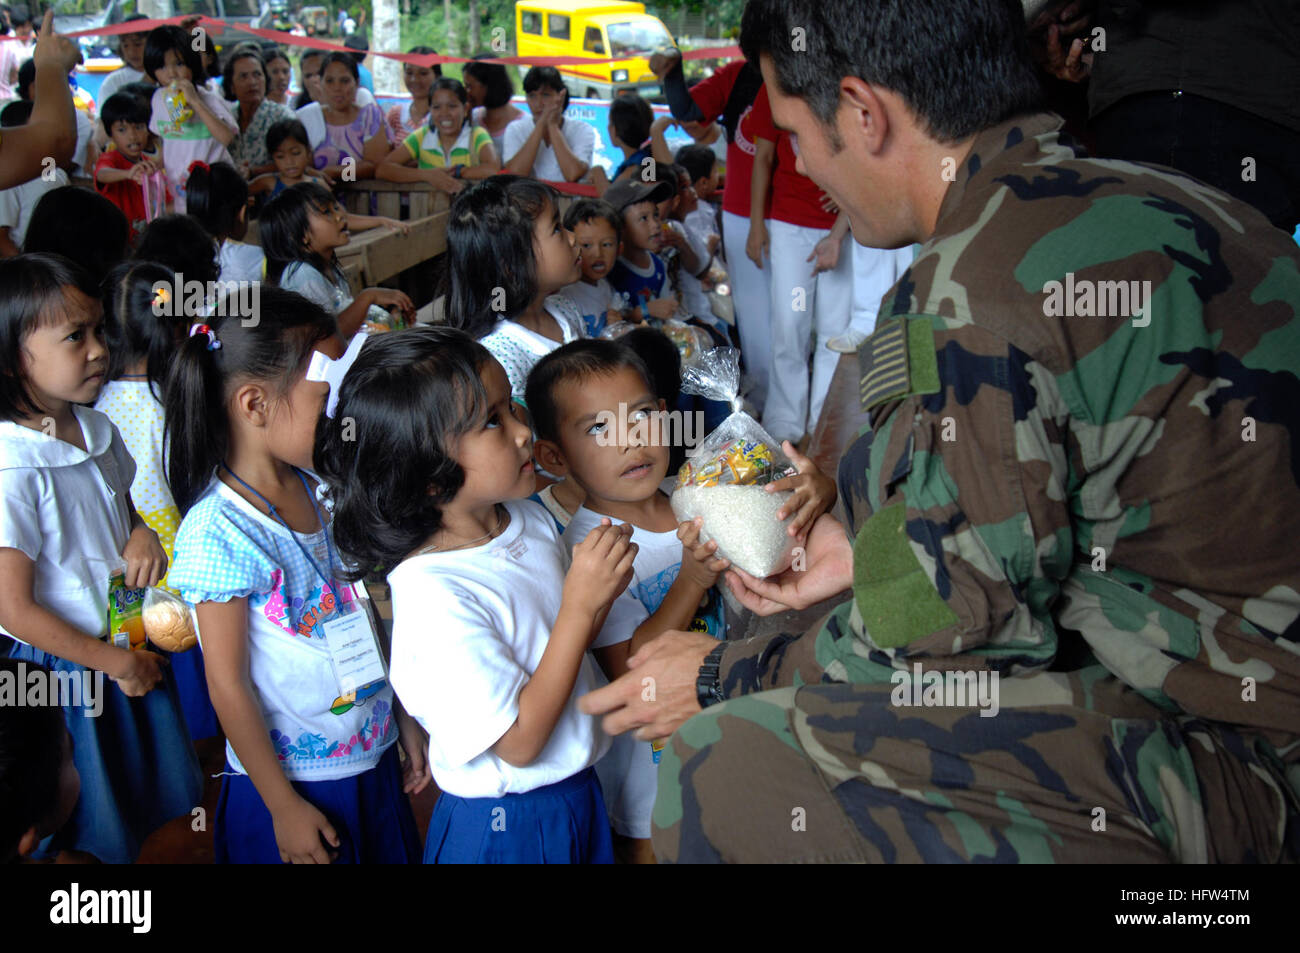 071227-N-7286M-033 BASILAN, Philippines (Dec. 27, 2007) A U.S. Navy SEAL (Sea Air Land) team member hands out rice and canned foods to students of Panunsulan Elementary School on the island of Basilan during a Medical Civic Action Program (MEDCAP).  SEAL Team members participated in the MEDCAP with representatives from Philippine Departments of Education and Health.  U.S. Navy photo by Mass Communication Specialist 1st Class Daniel R. Mennuto (Released) US Navy 071227-N-7286M-033 A U.S. Navy SEAL (Sea Air Land) team member hands out rice and canned foods to students of Panunsulan Elementary Sc Stock Photo